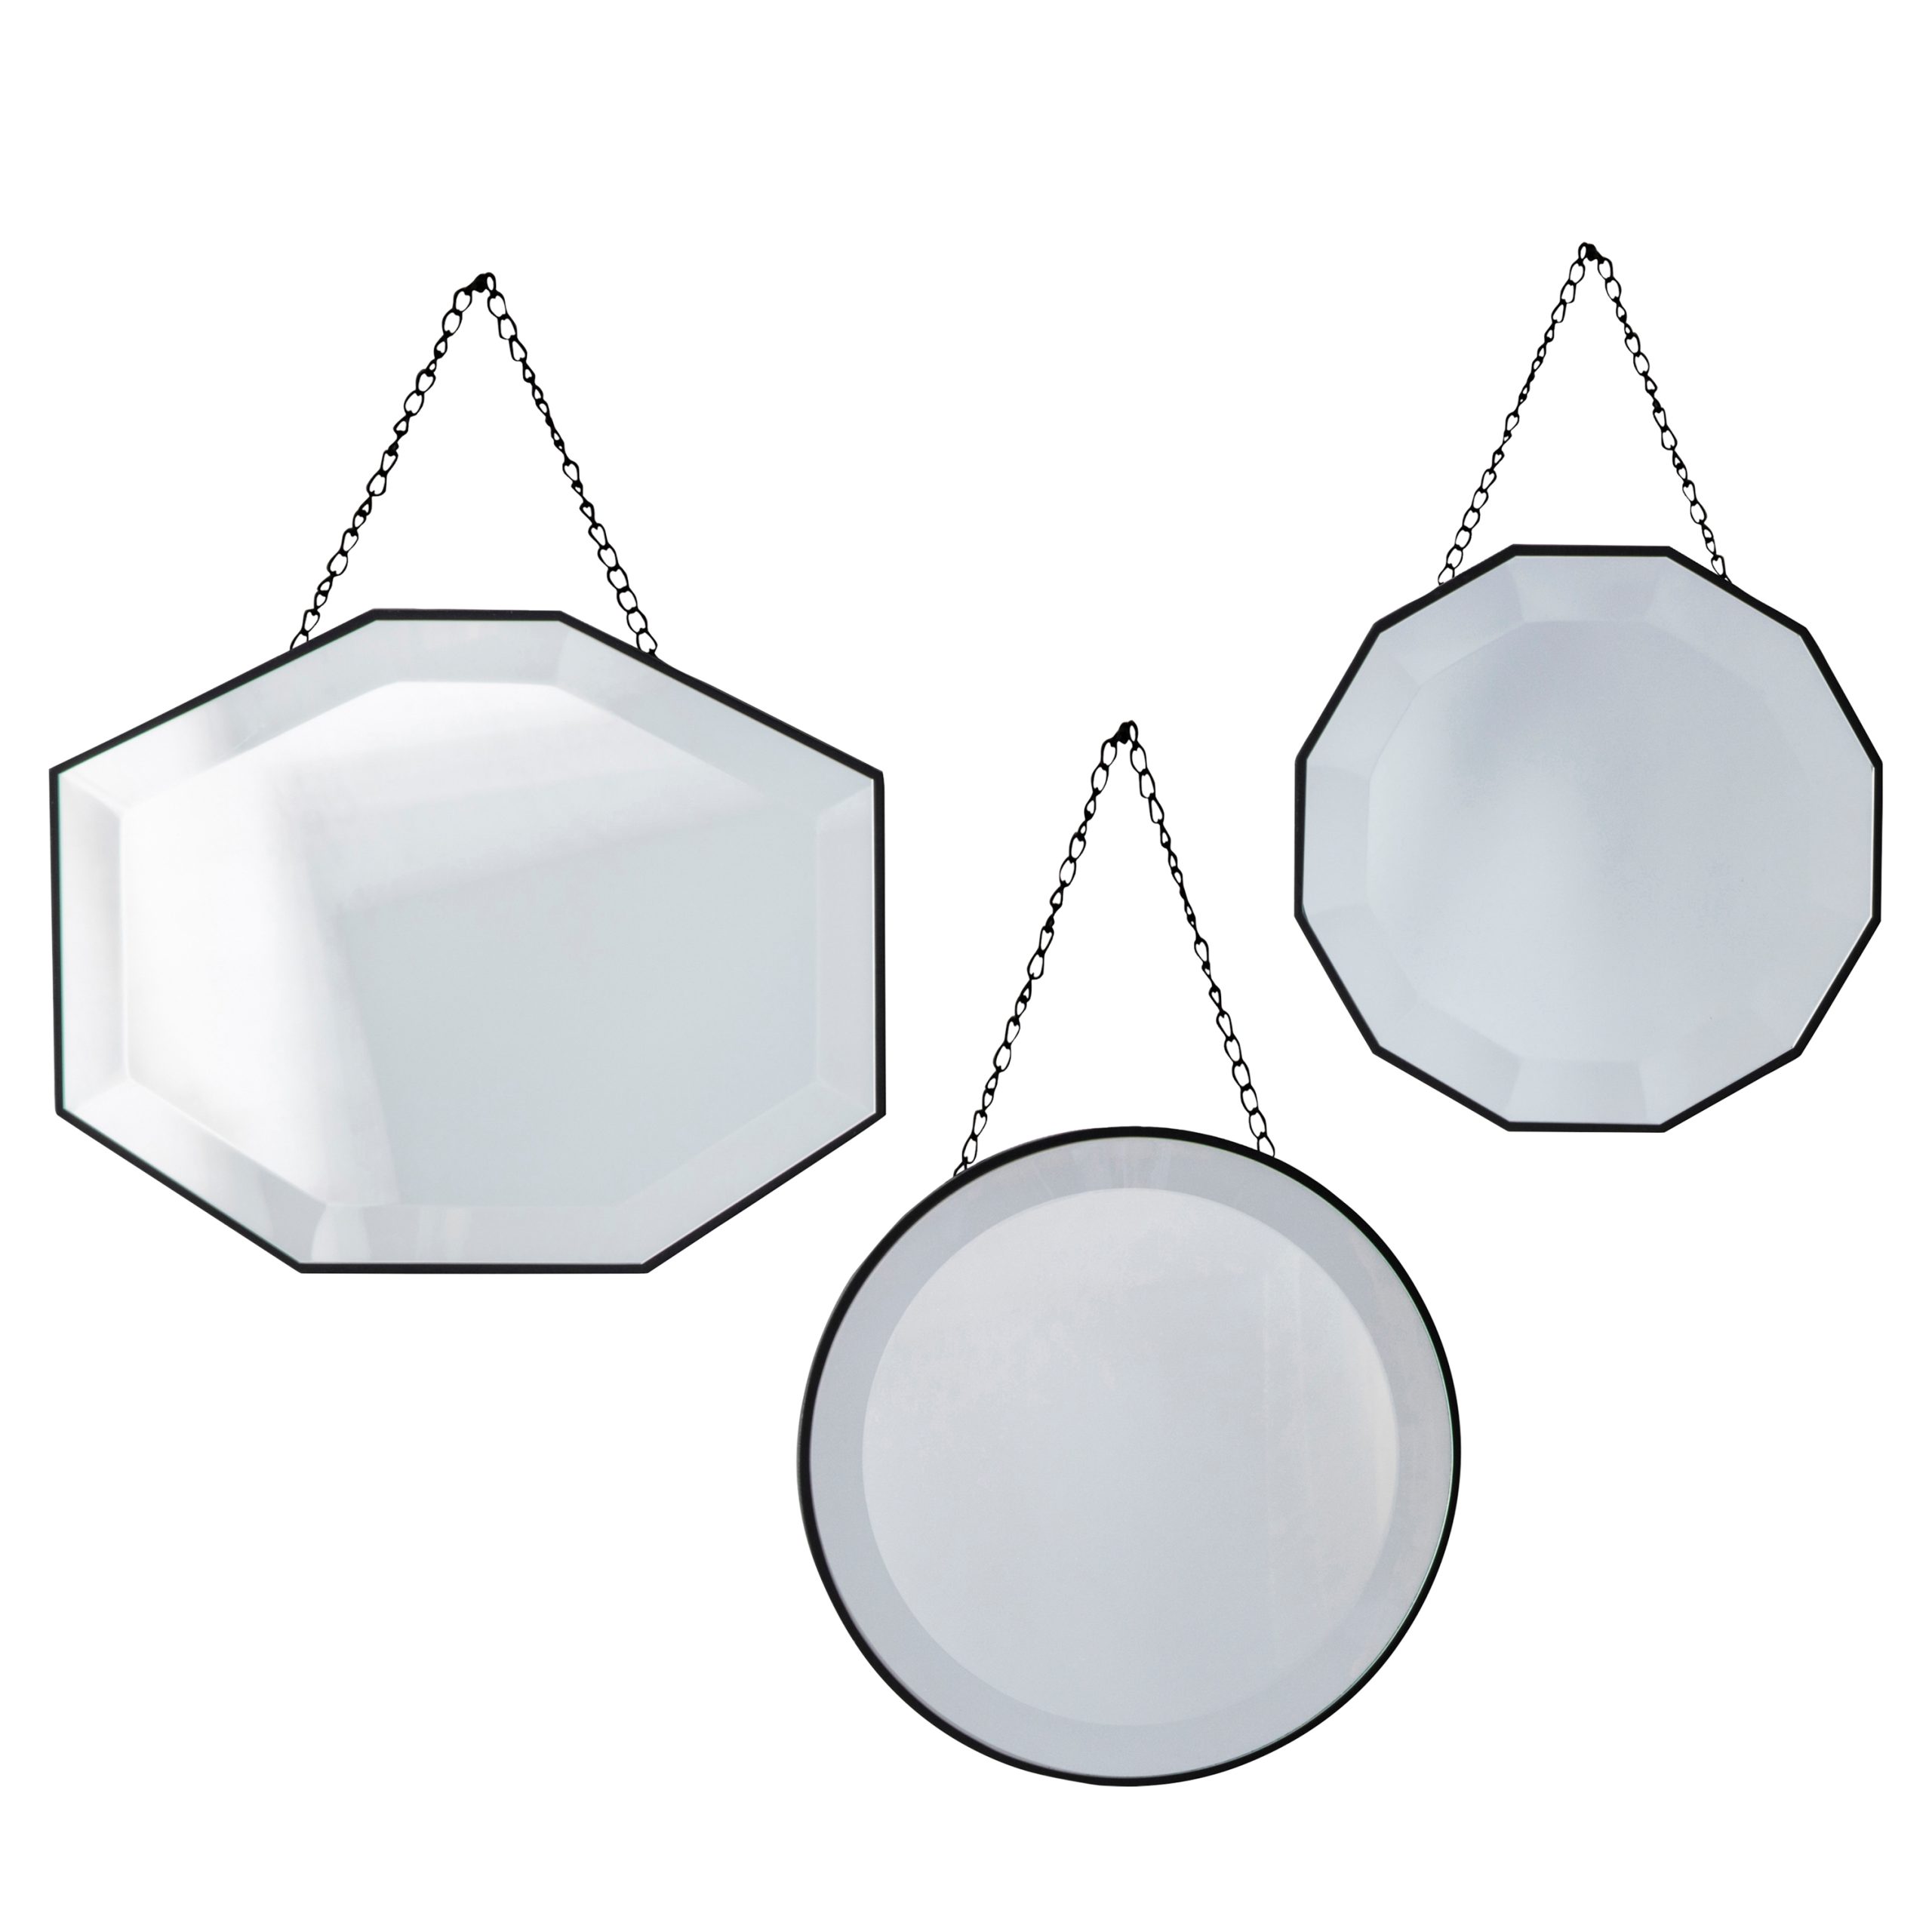 Gallery Direct Haines Scatter Mirrors (Set of 3)